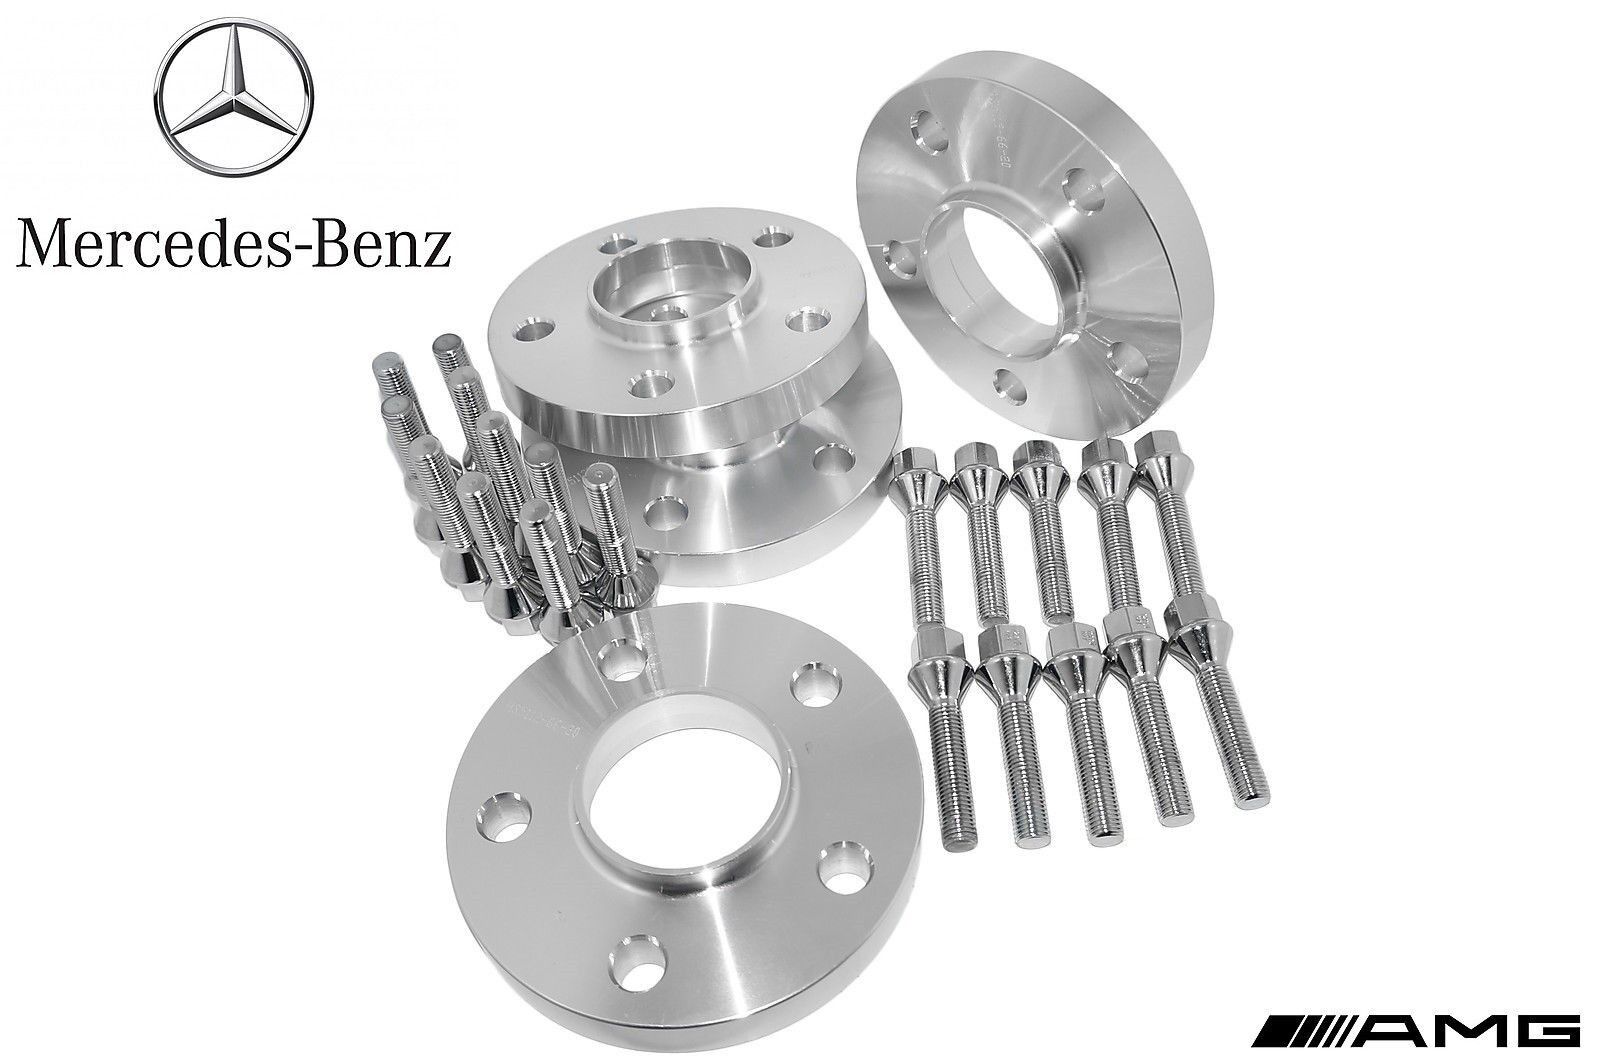 4 Pc Set Of Mercedes Benz ( 20 mm Thick ) Hub-Centric Wheel Spacers W/ Lug Bolts